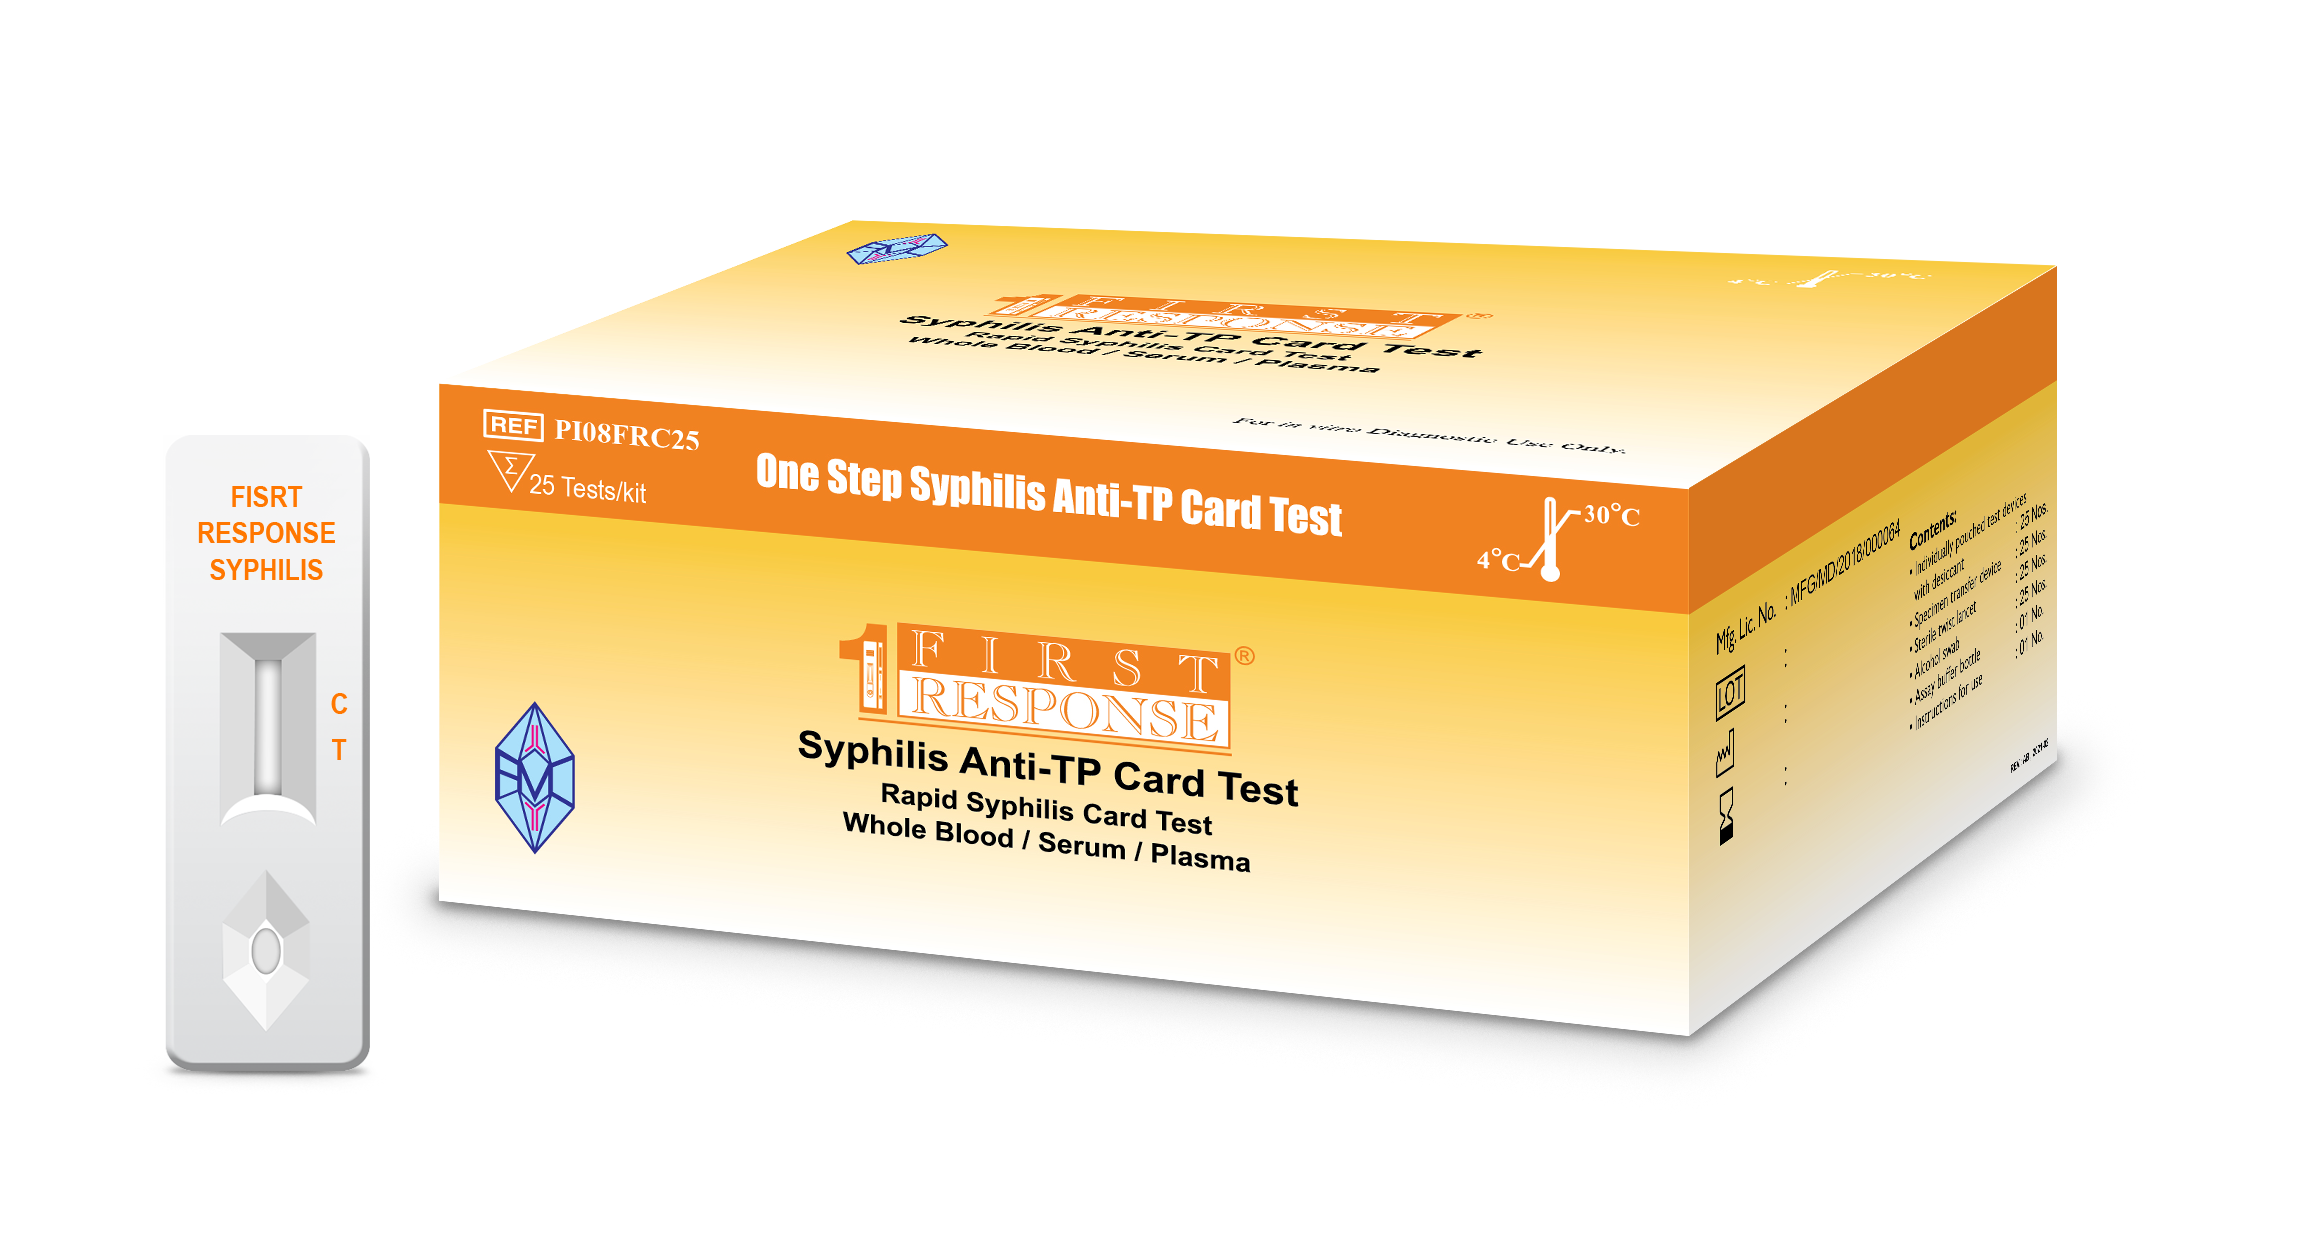 WHO Prequalification of First Response Syphilis Anti-TP Card Test